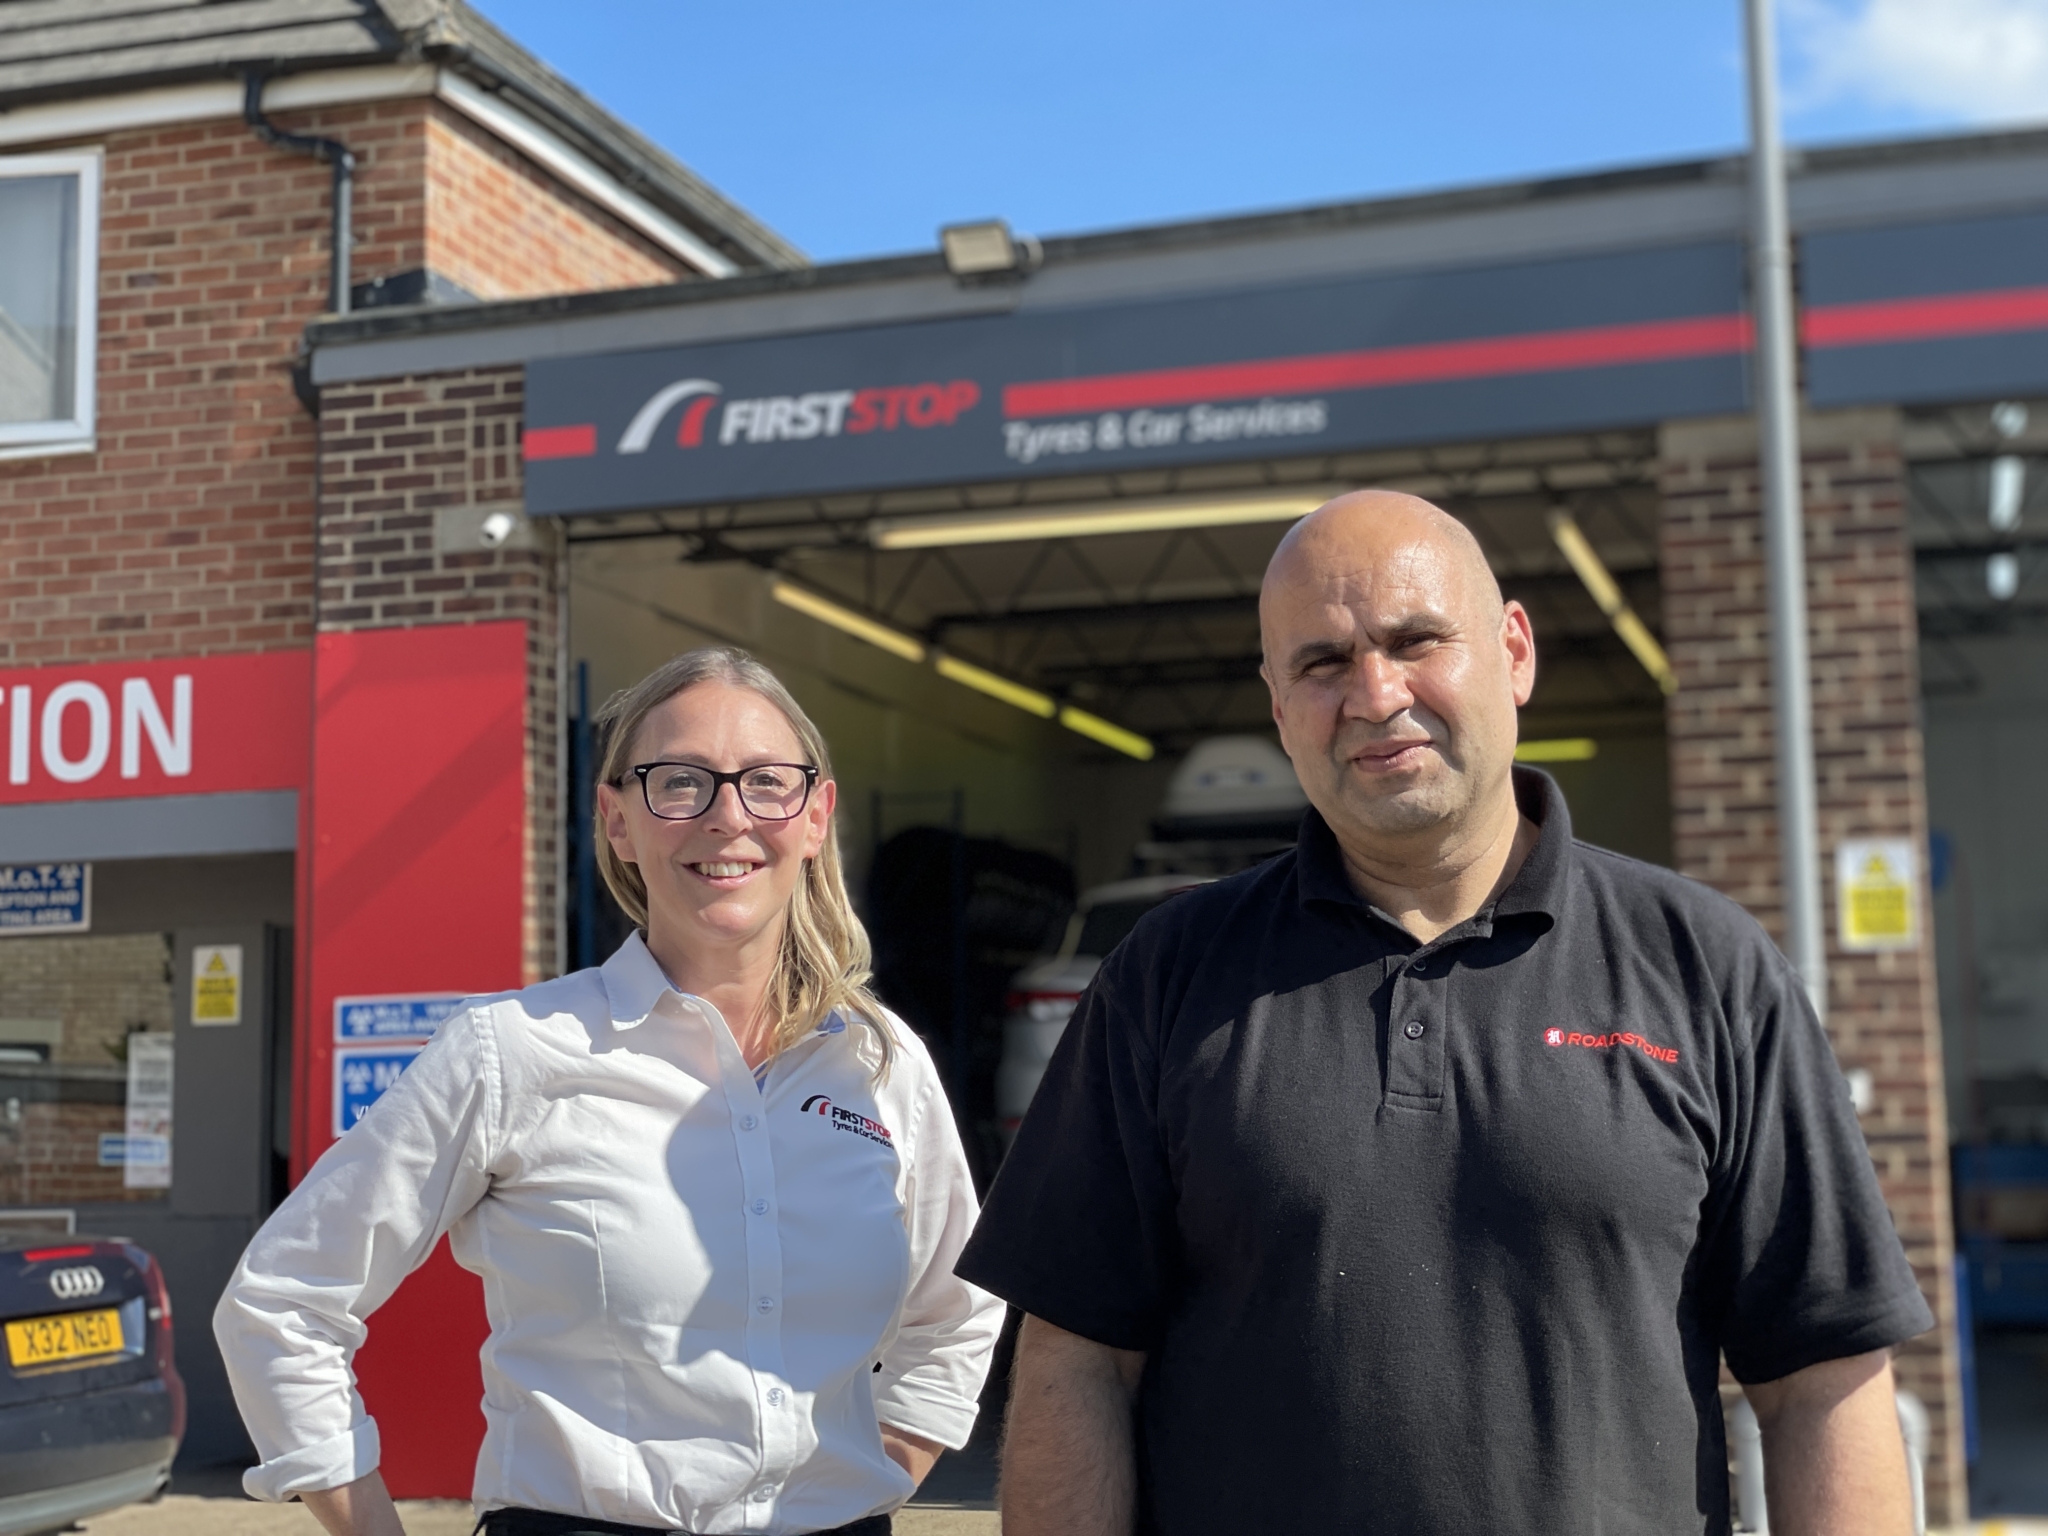 Bicester garage Grip Tyres joins First Stop network